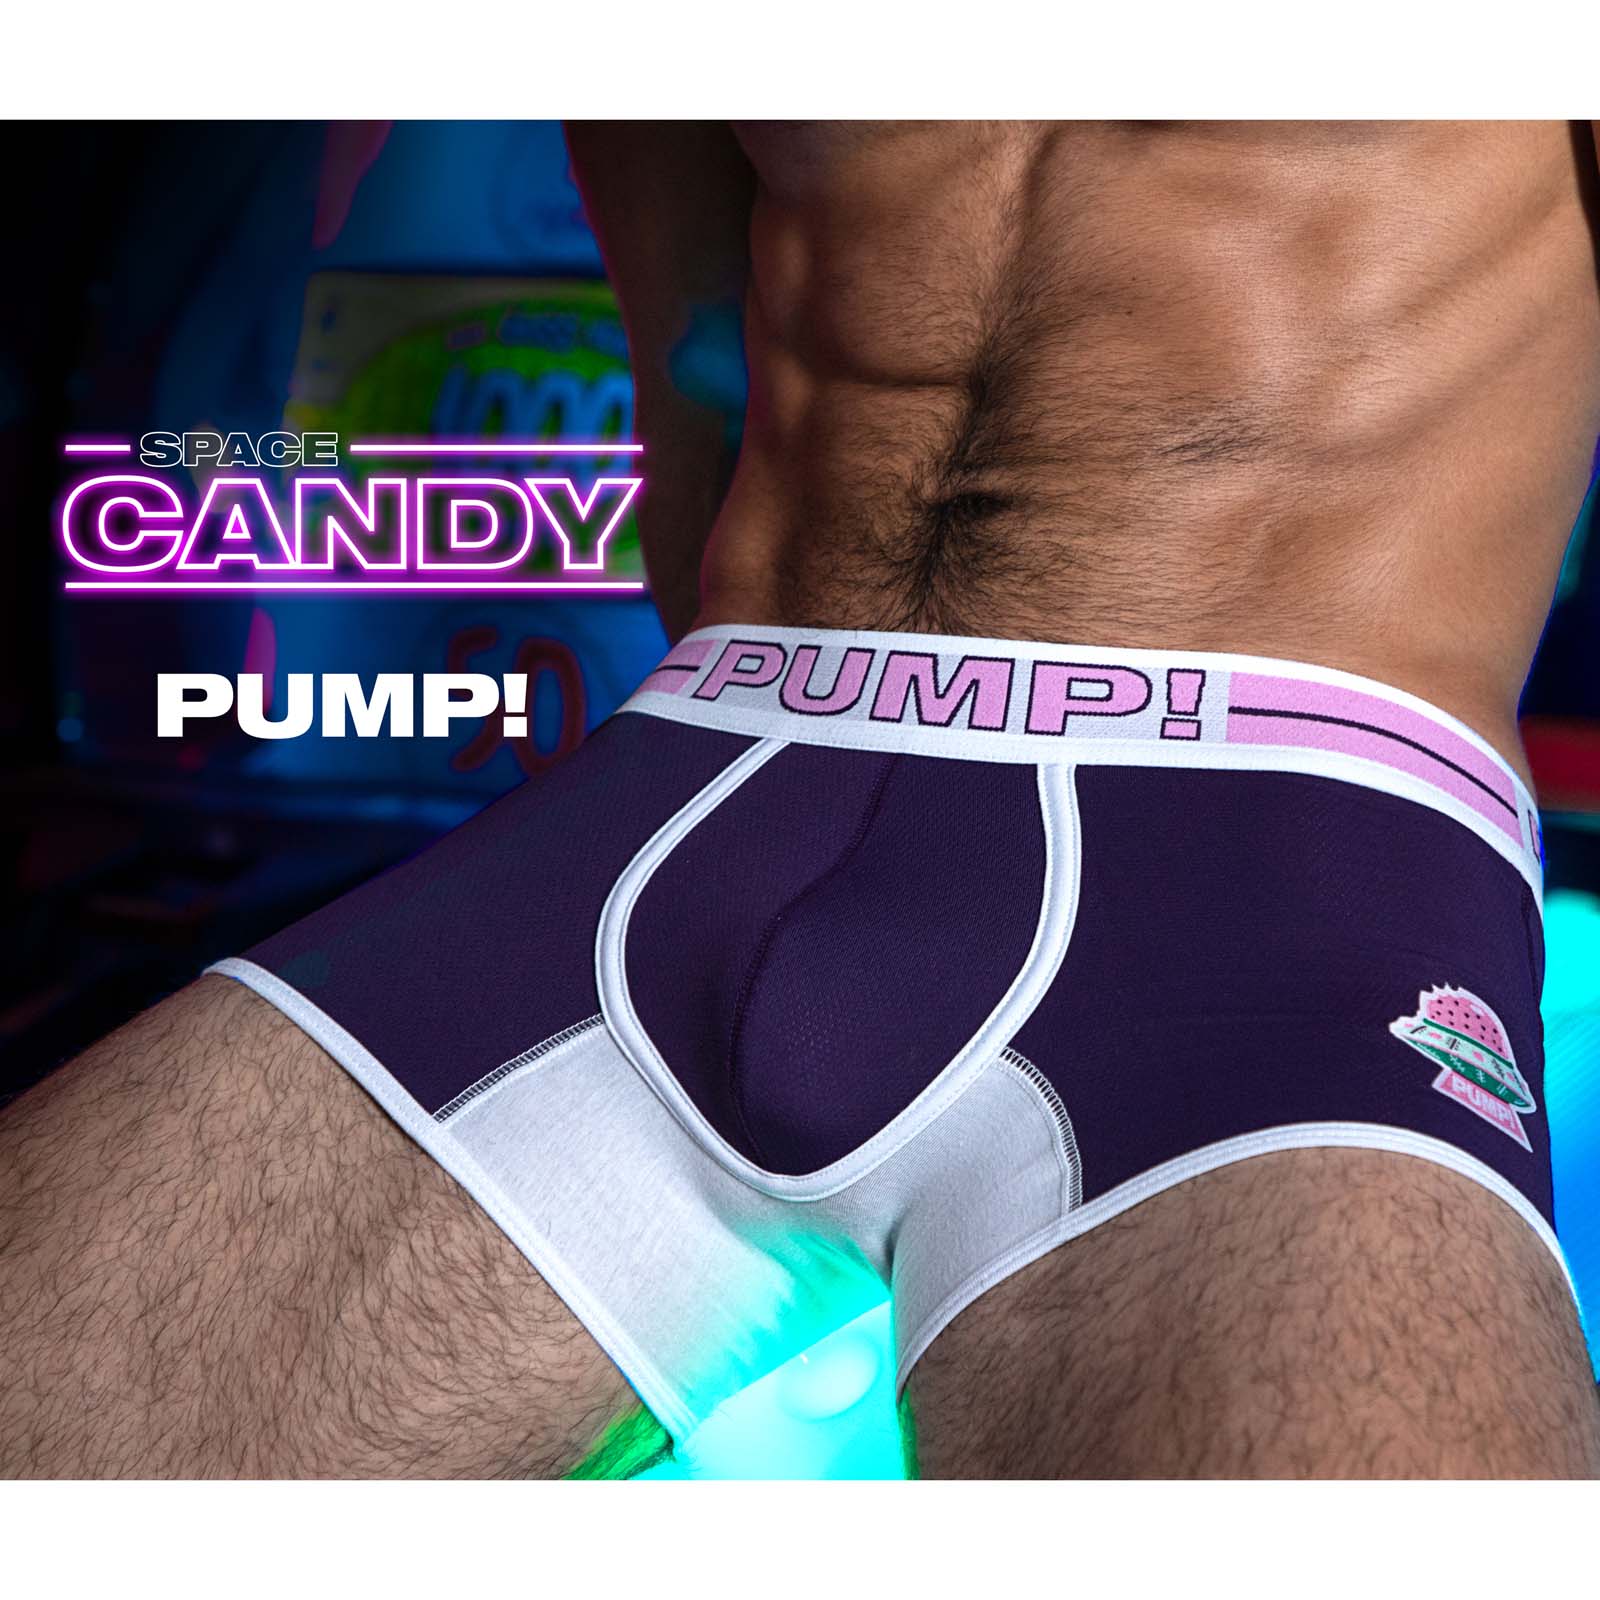 Boxer Pump! Space candy 11083